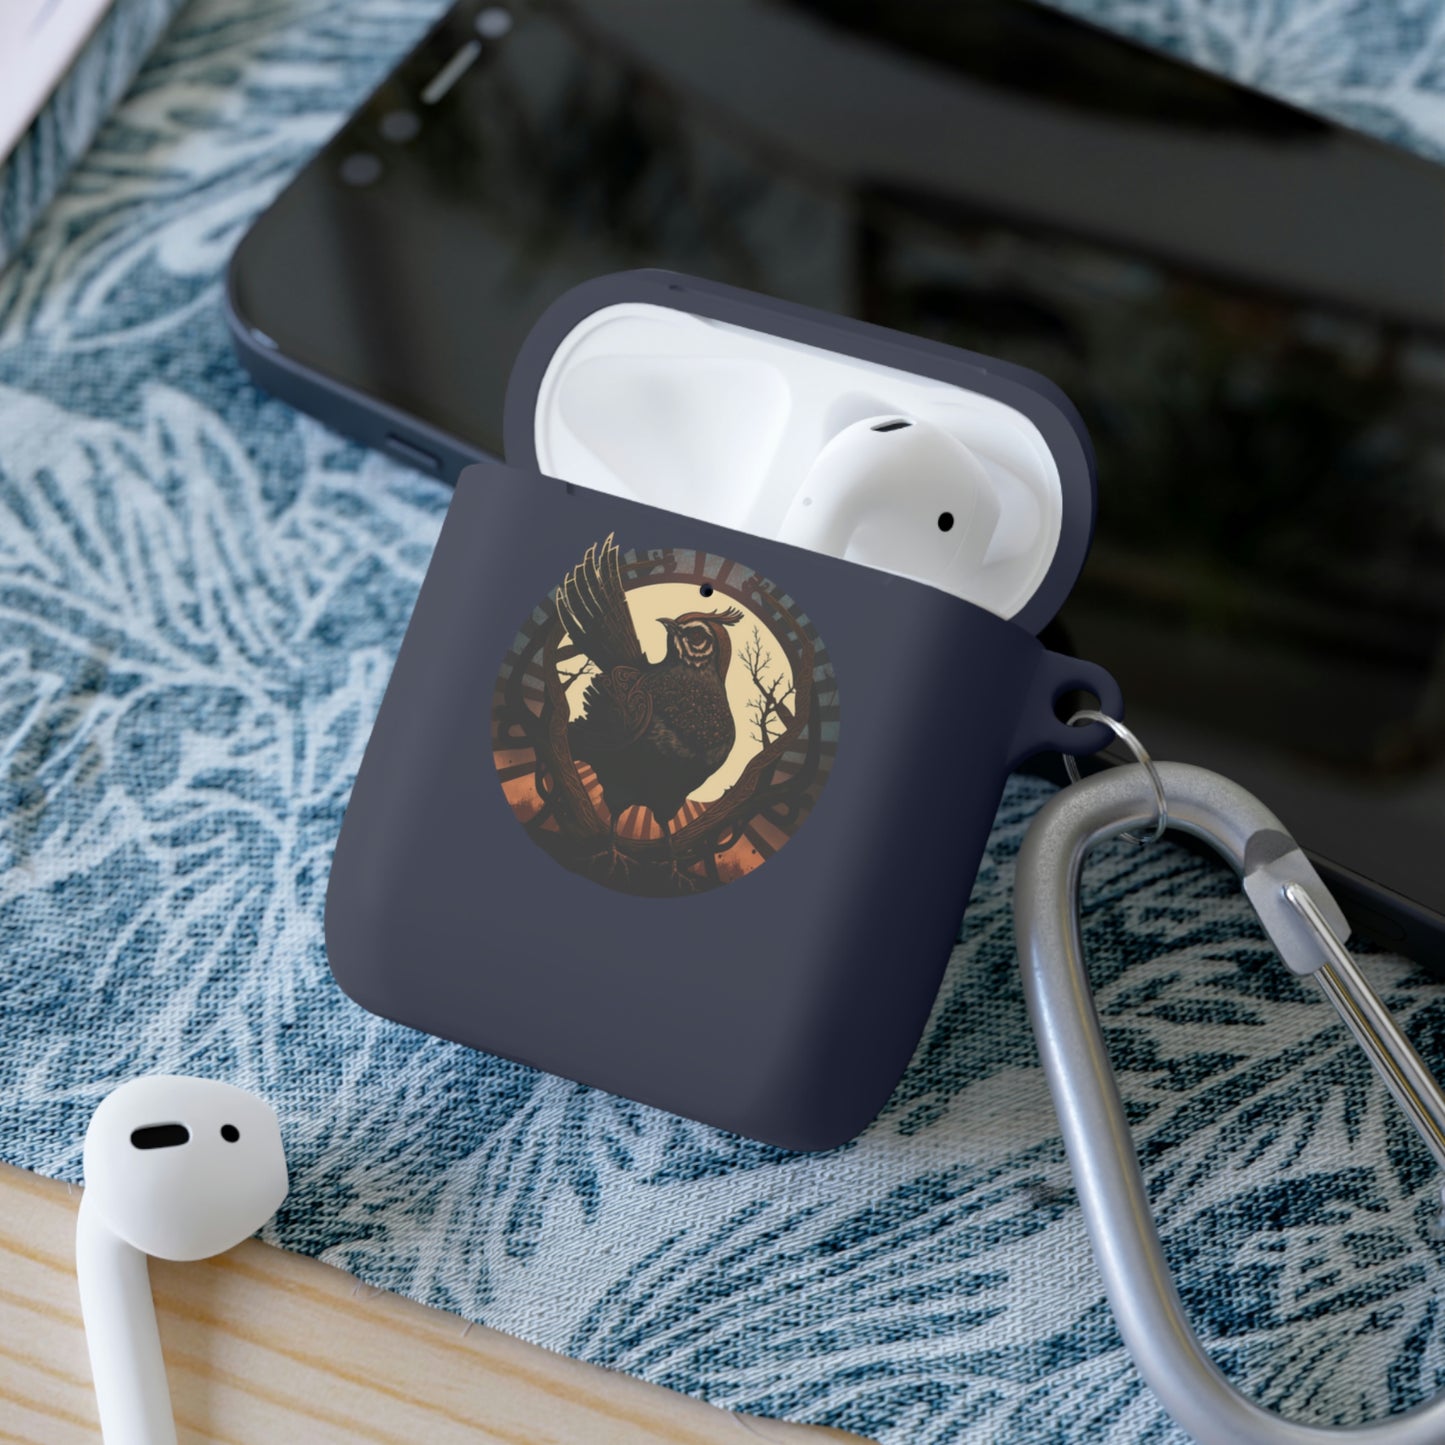 AirPods and AirPods Pro Case Cover - Quail Keeping is Metal